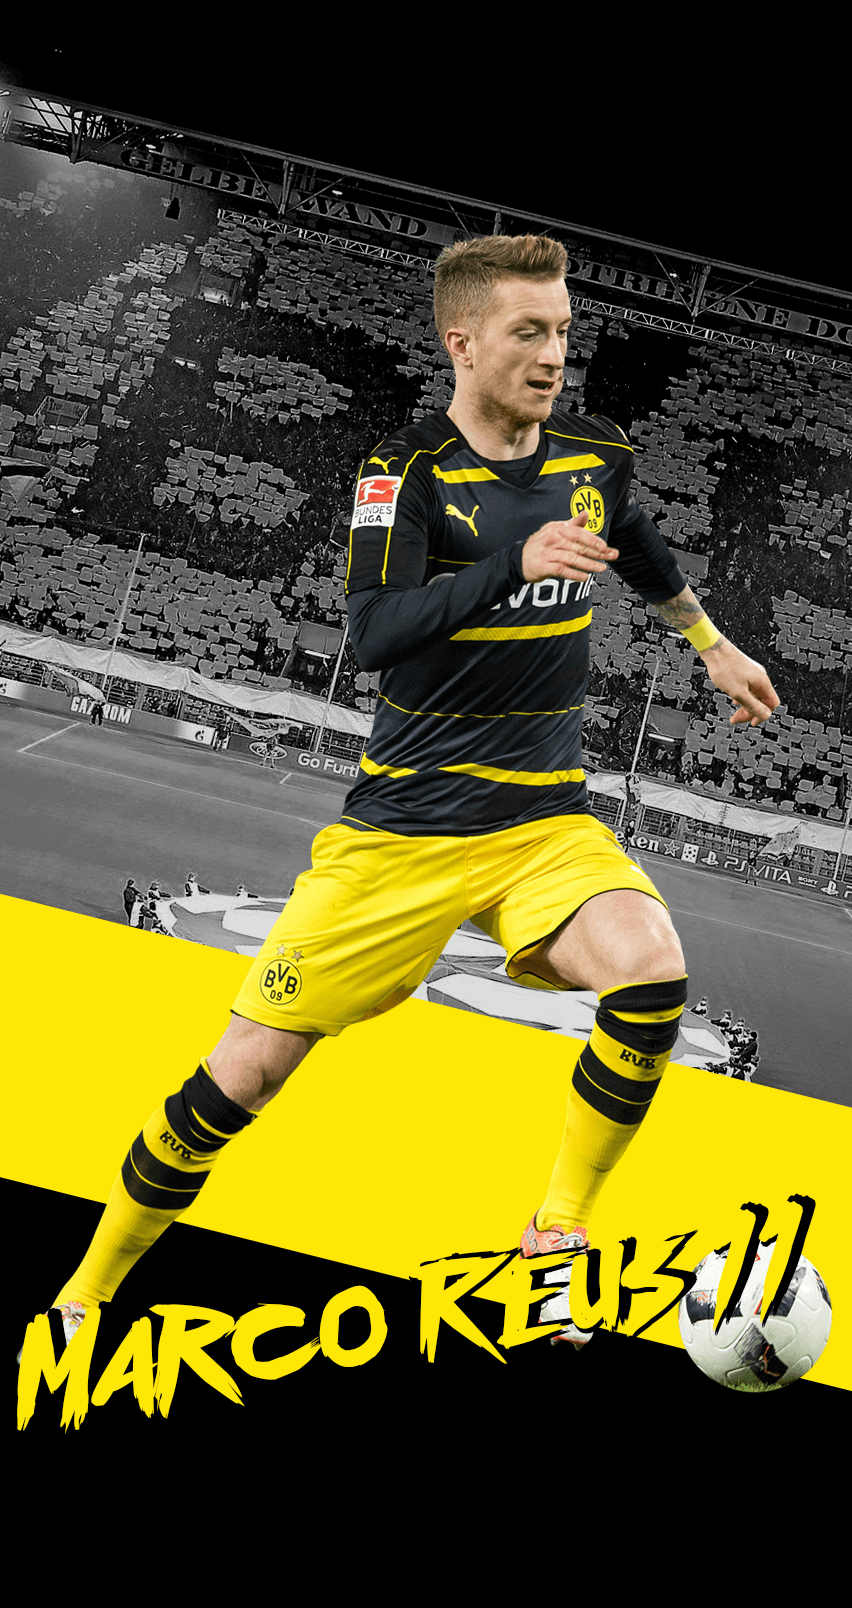 Made this iPhone wallpaper of Marco! What player should I make a